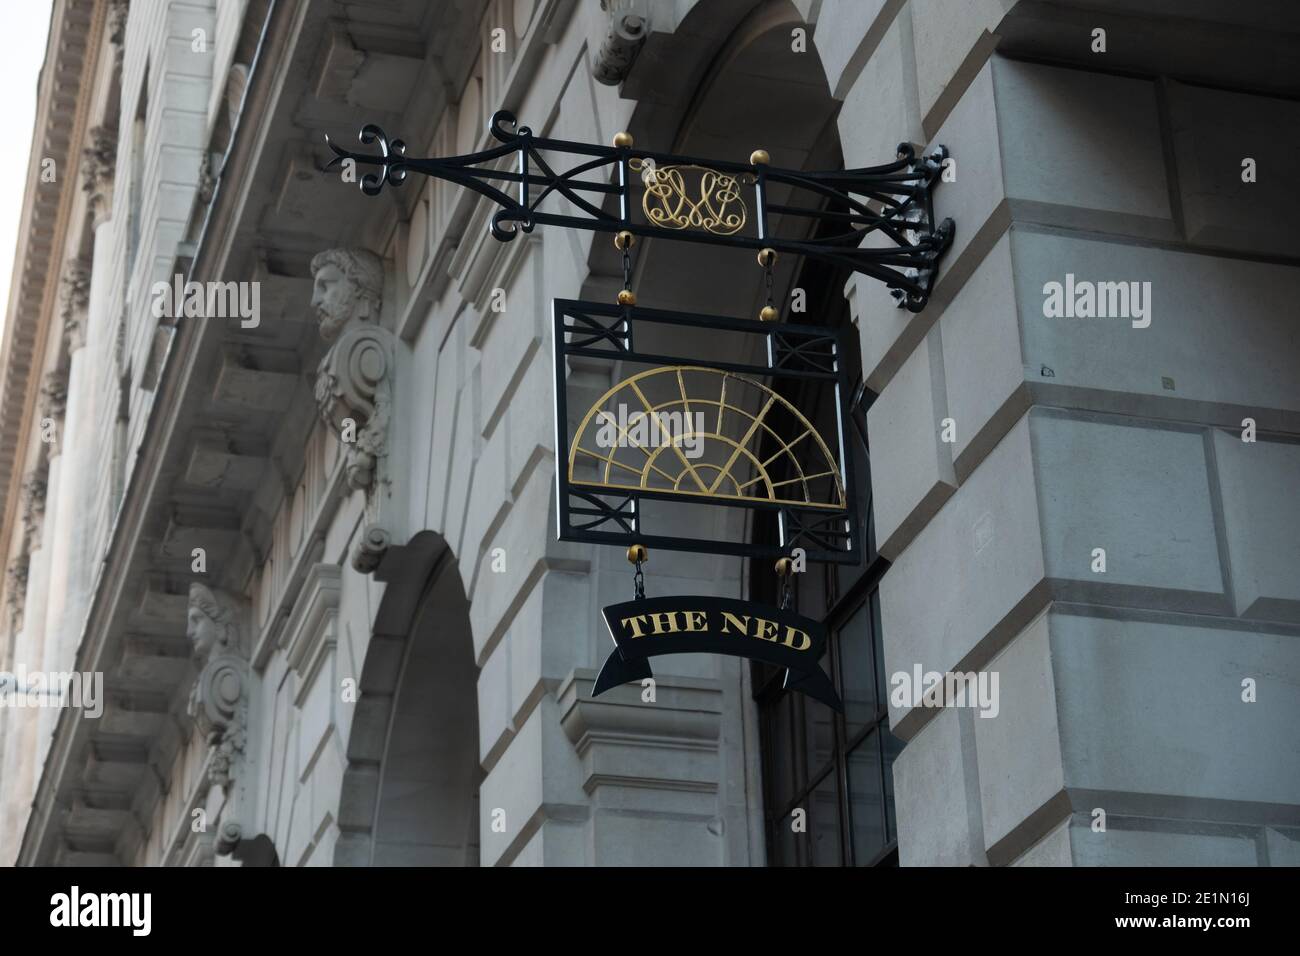 LONDON-The Ned, signage of the 5 star hotel and private members club in the City of London Stock Photo